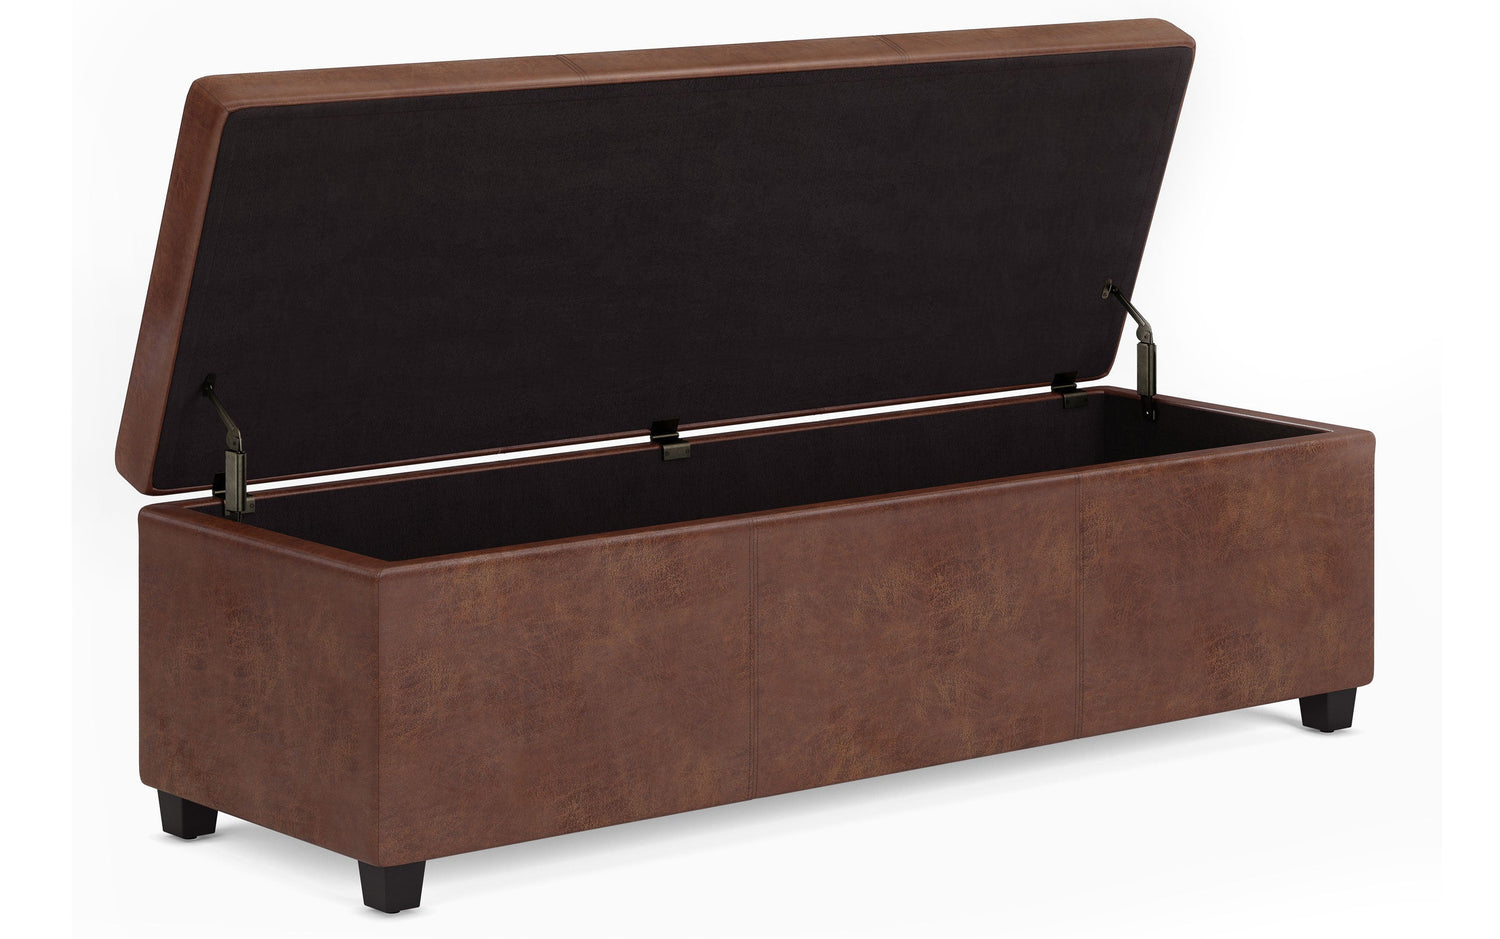 Distressed Saddle Brown Distressed Vegan Leather | Avalon Extra Large Storage Ottoman in Distressed Vegan Leather